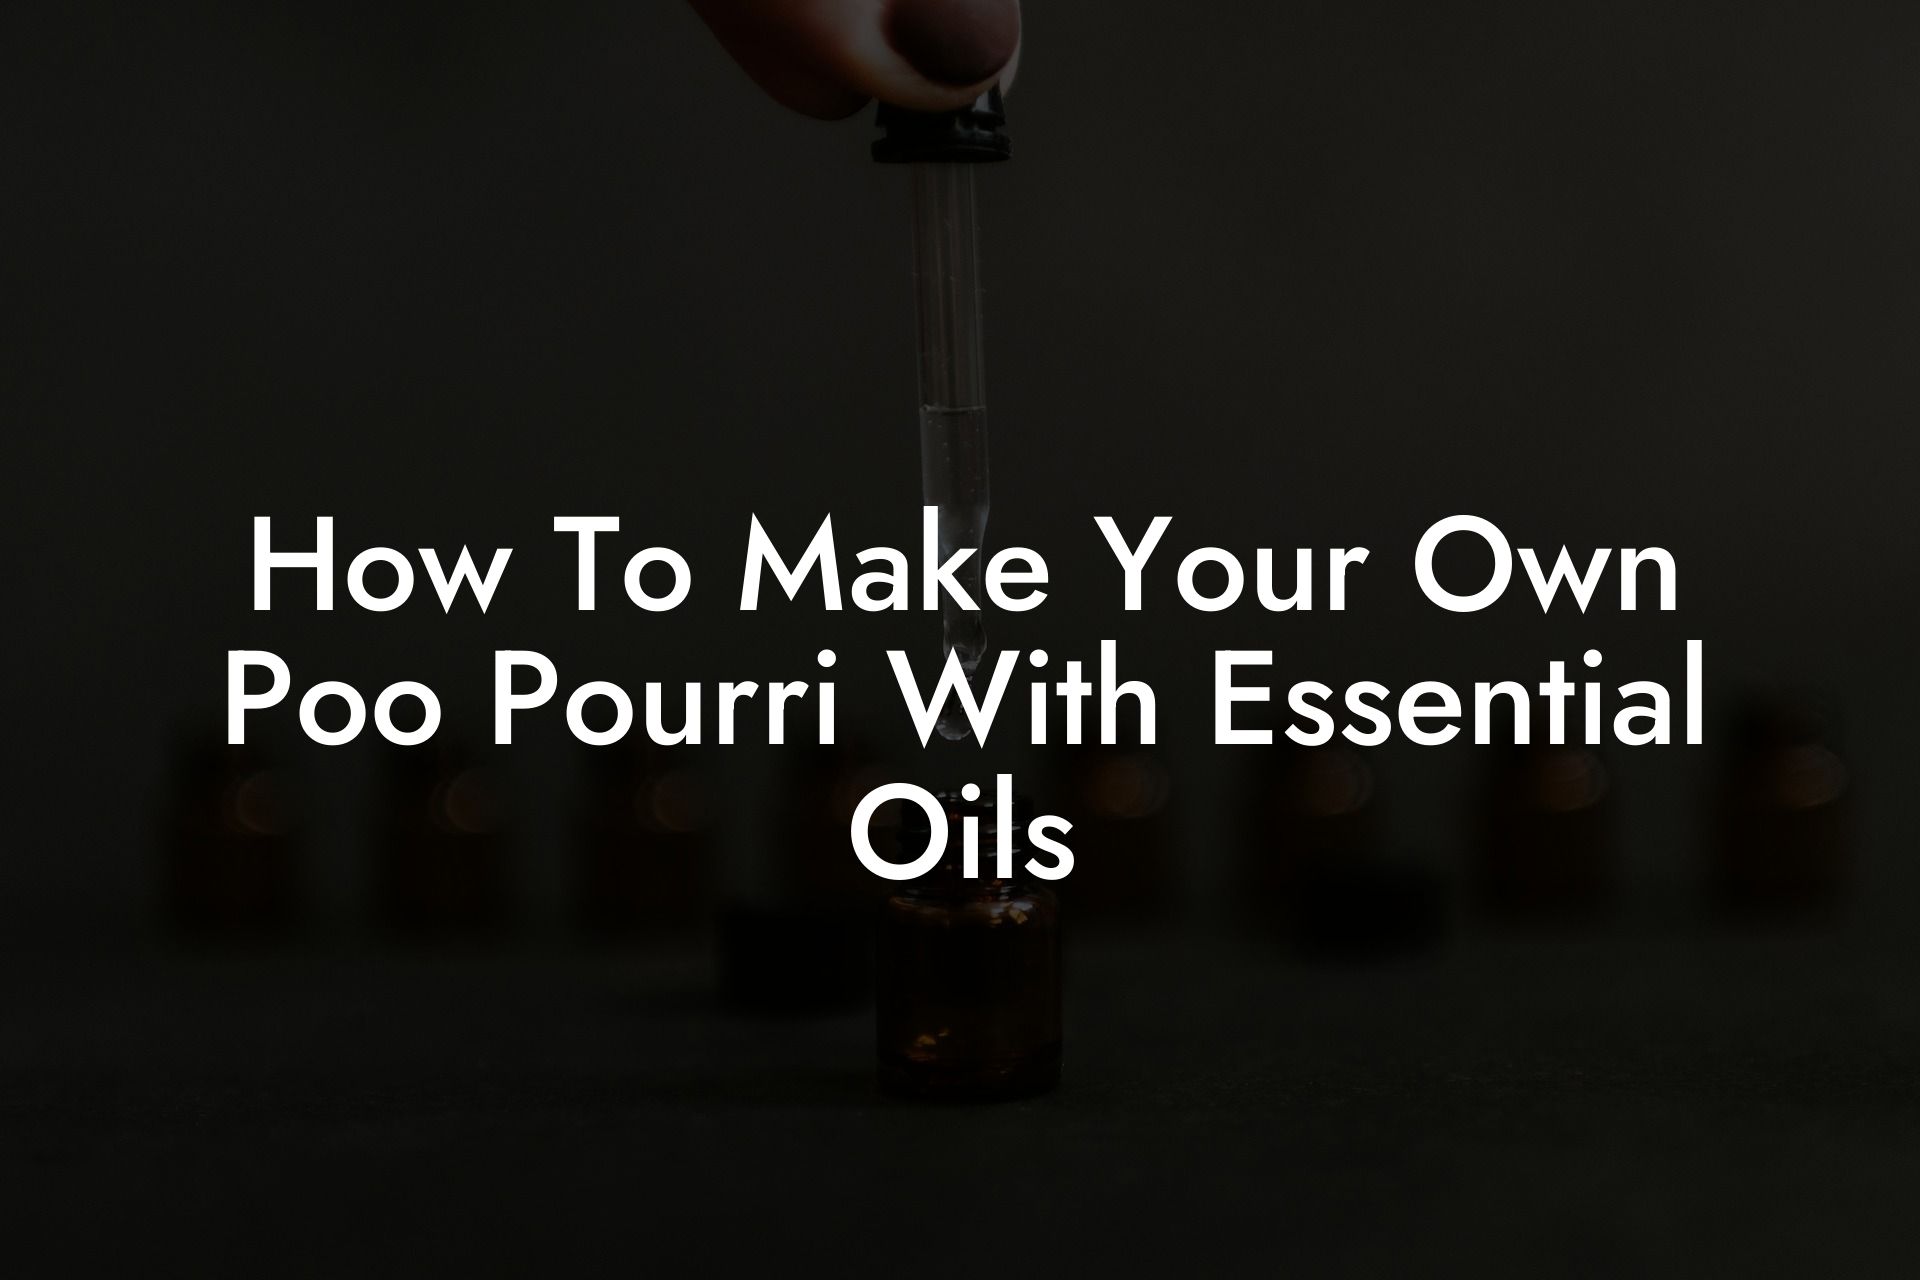 How To Make Your Own Poo Pourri With Essential Oils